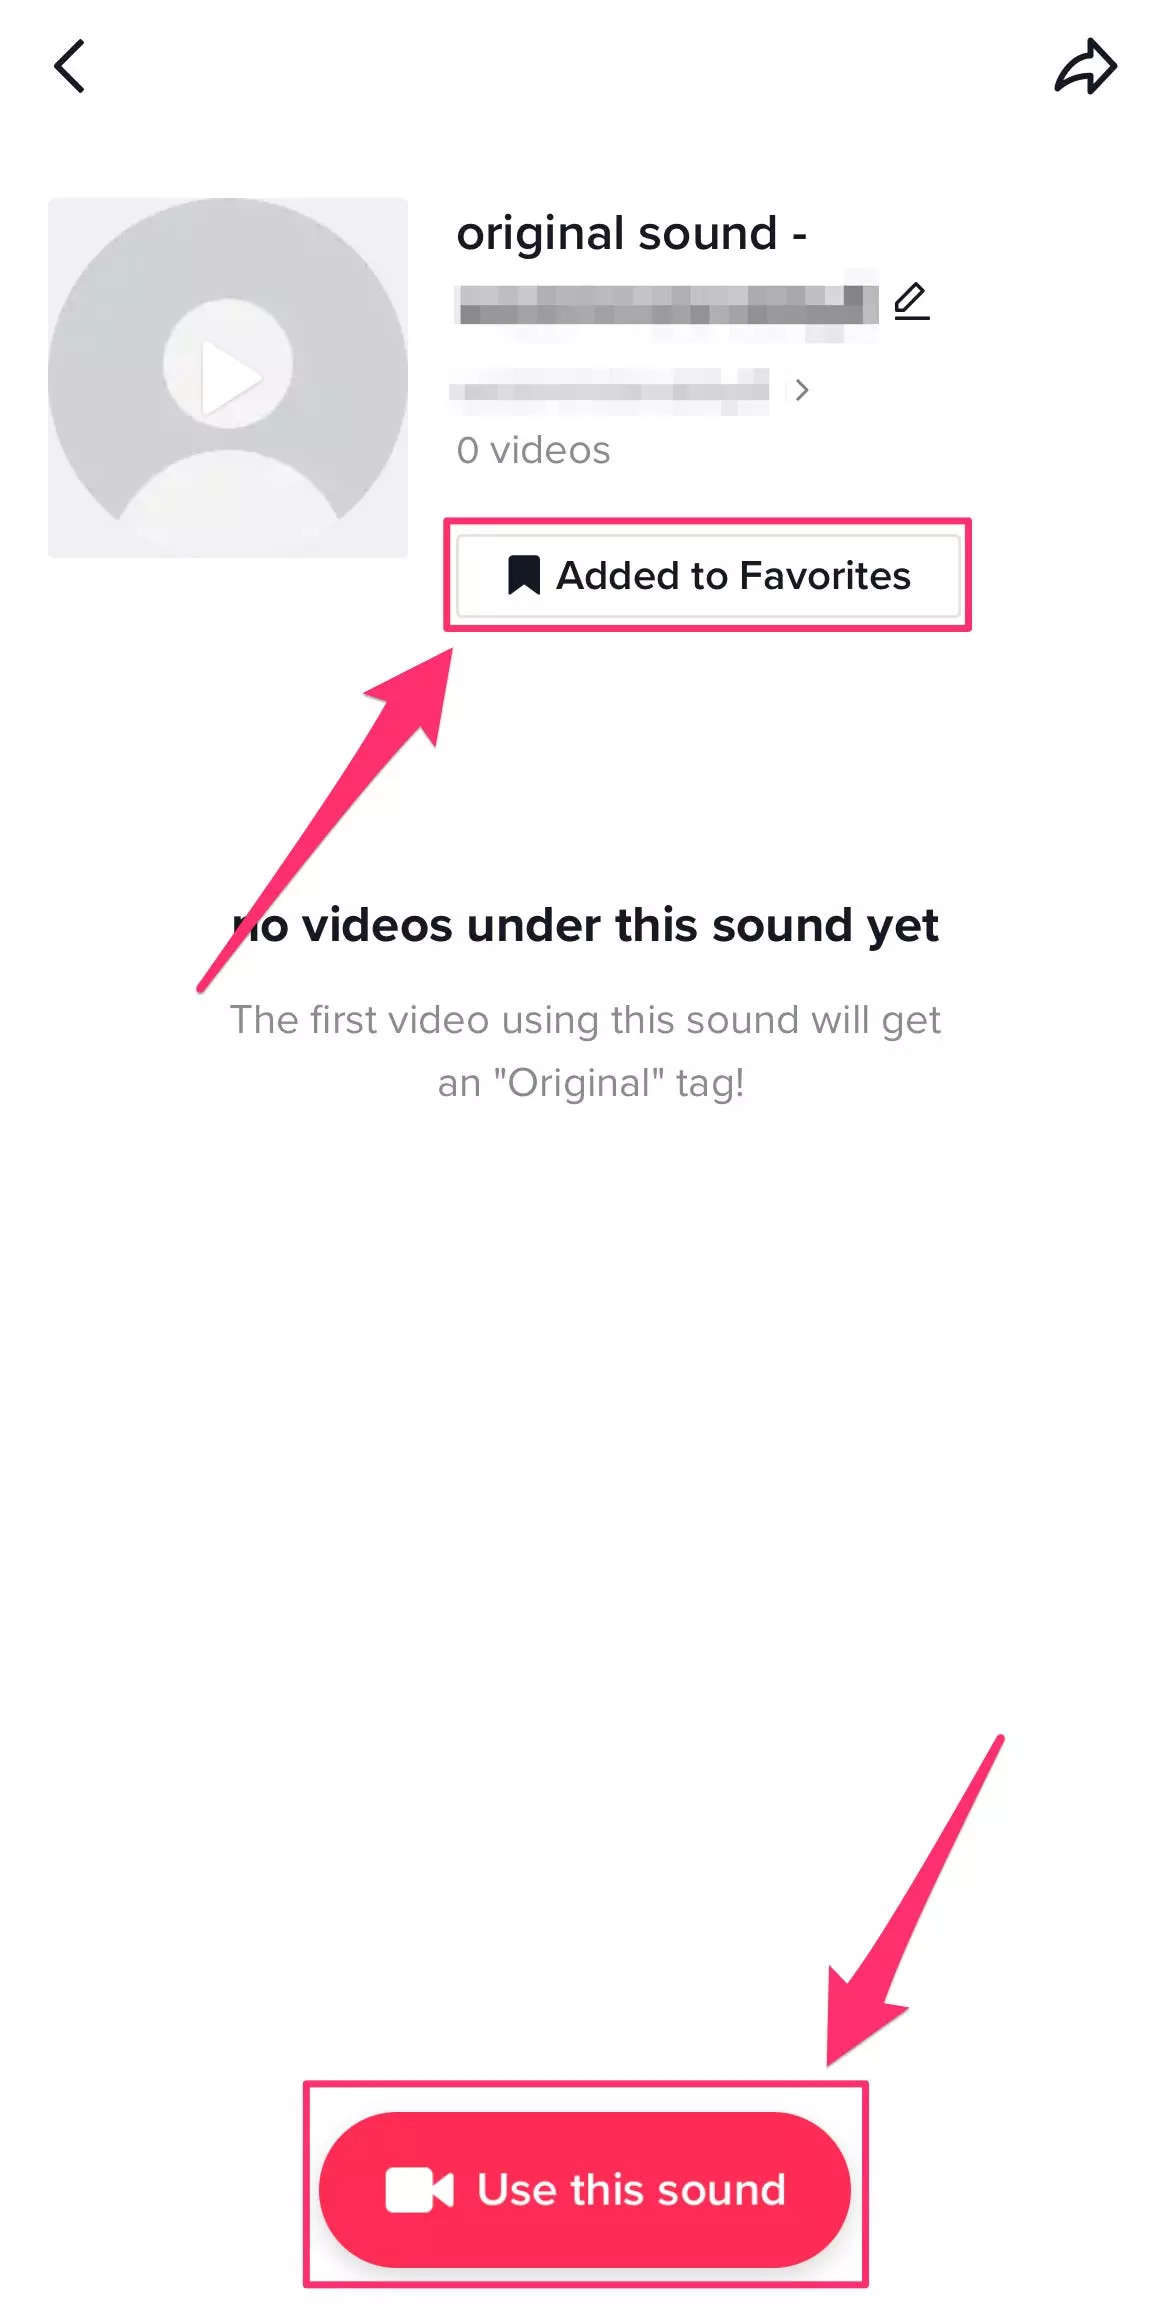 How to make your own sound on TikTok, or add music and voiceover to your videos